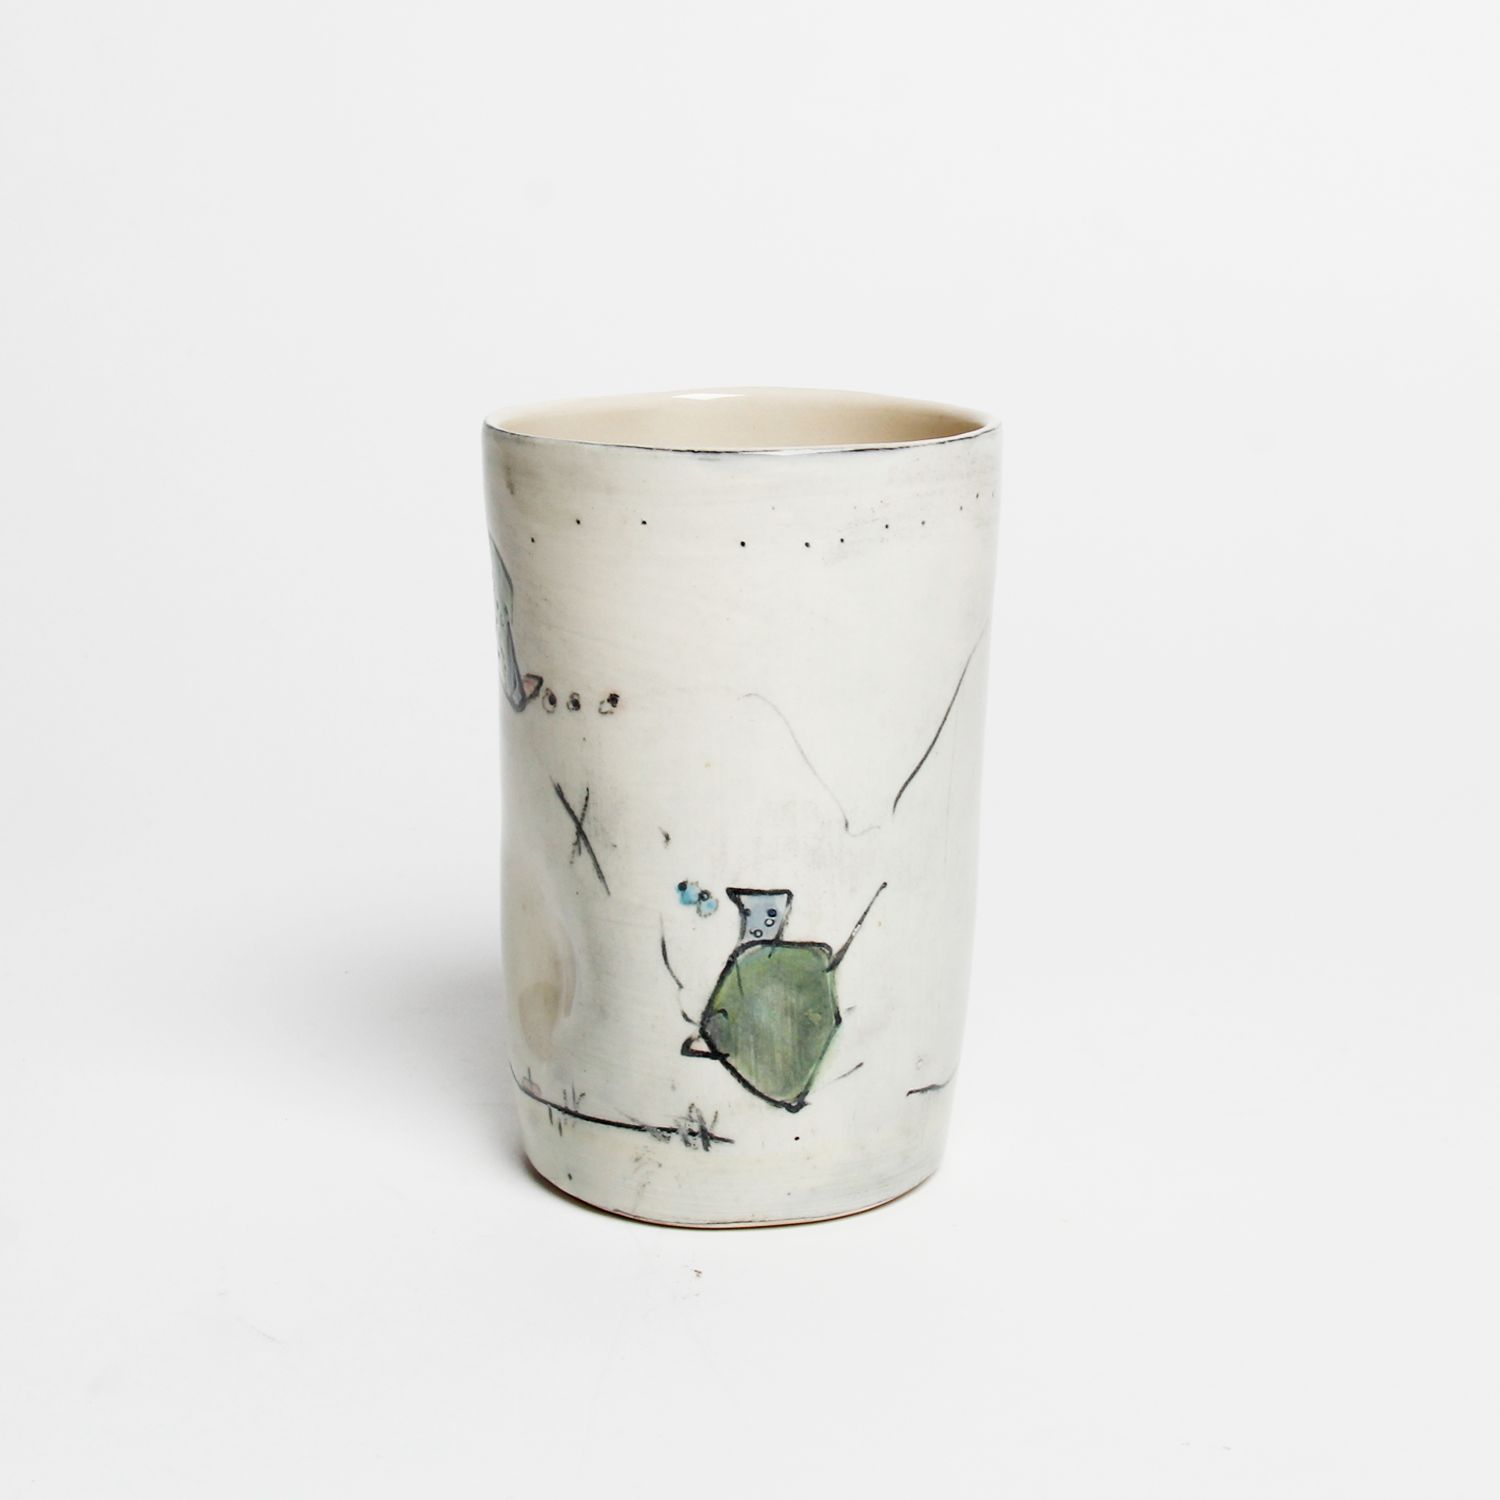 Stephen Hawes: Tall Cup Product Image 1 of 4